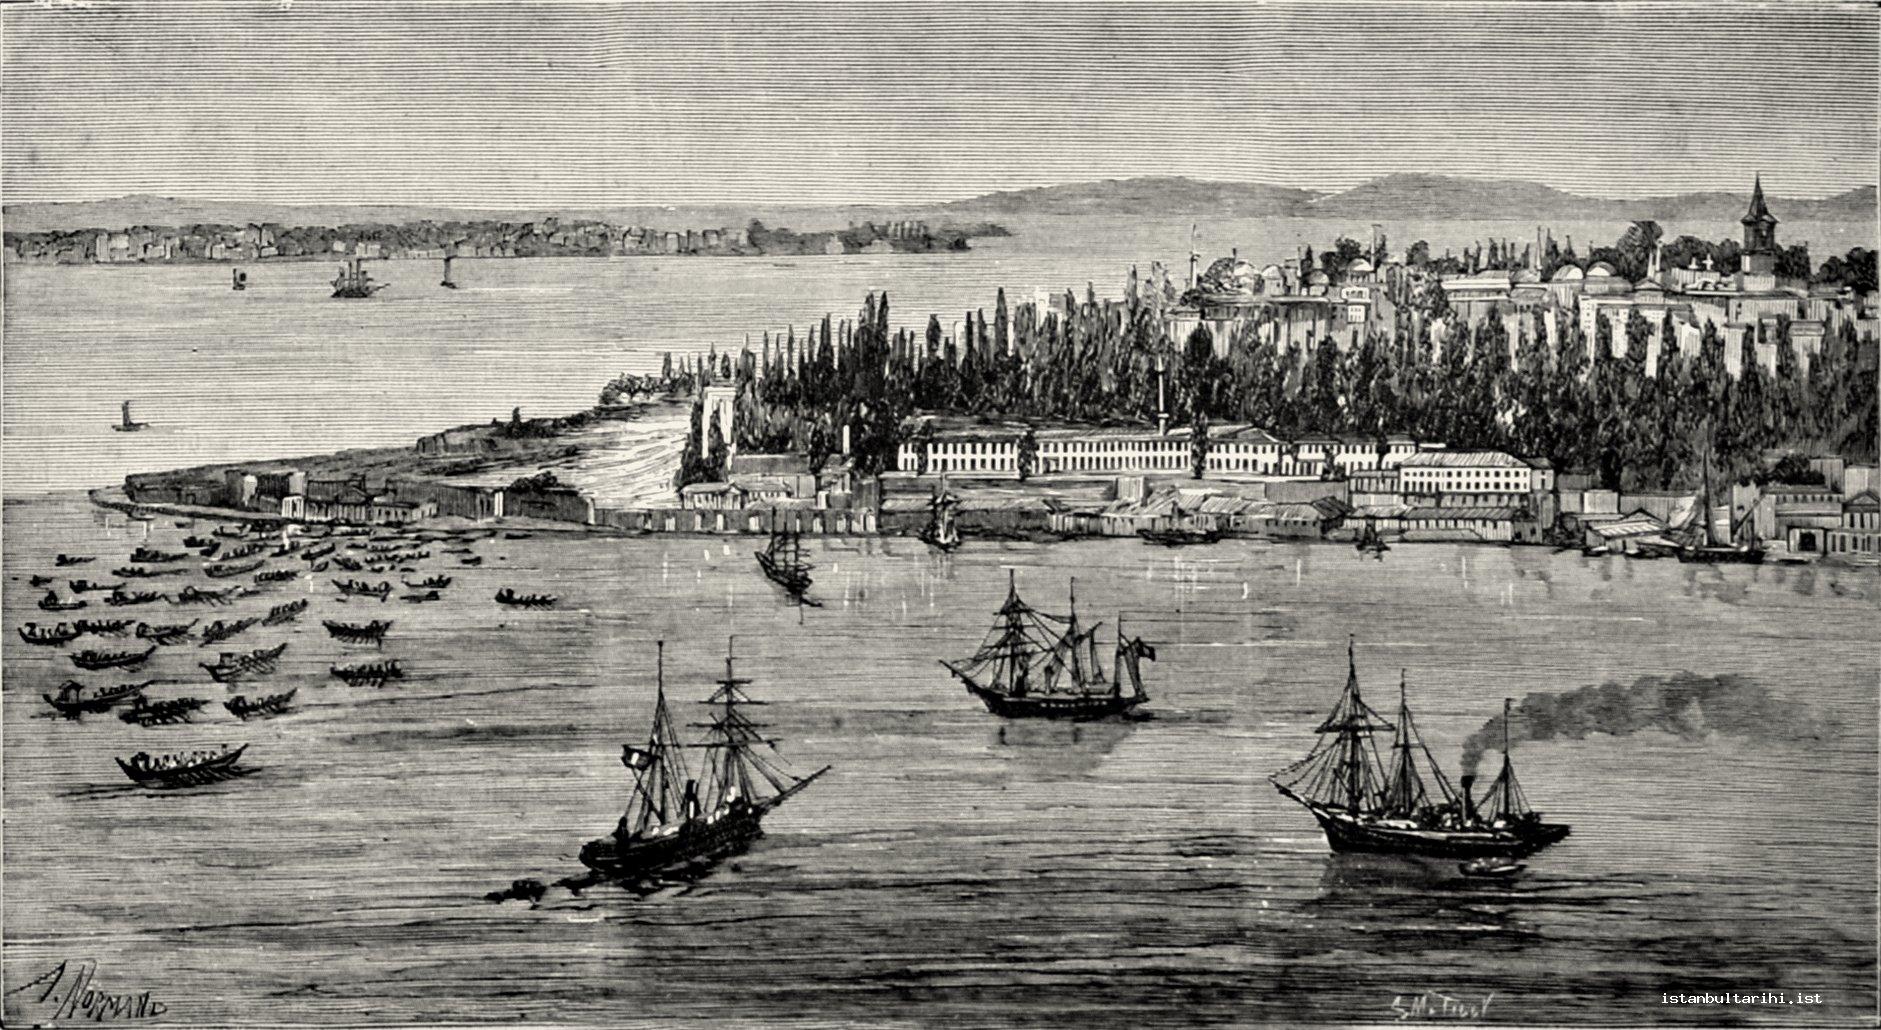 24c- Sultan Abdülaziz’s dethronement and his transfer from Dolmabahçe Palace to Topkapı Palace